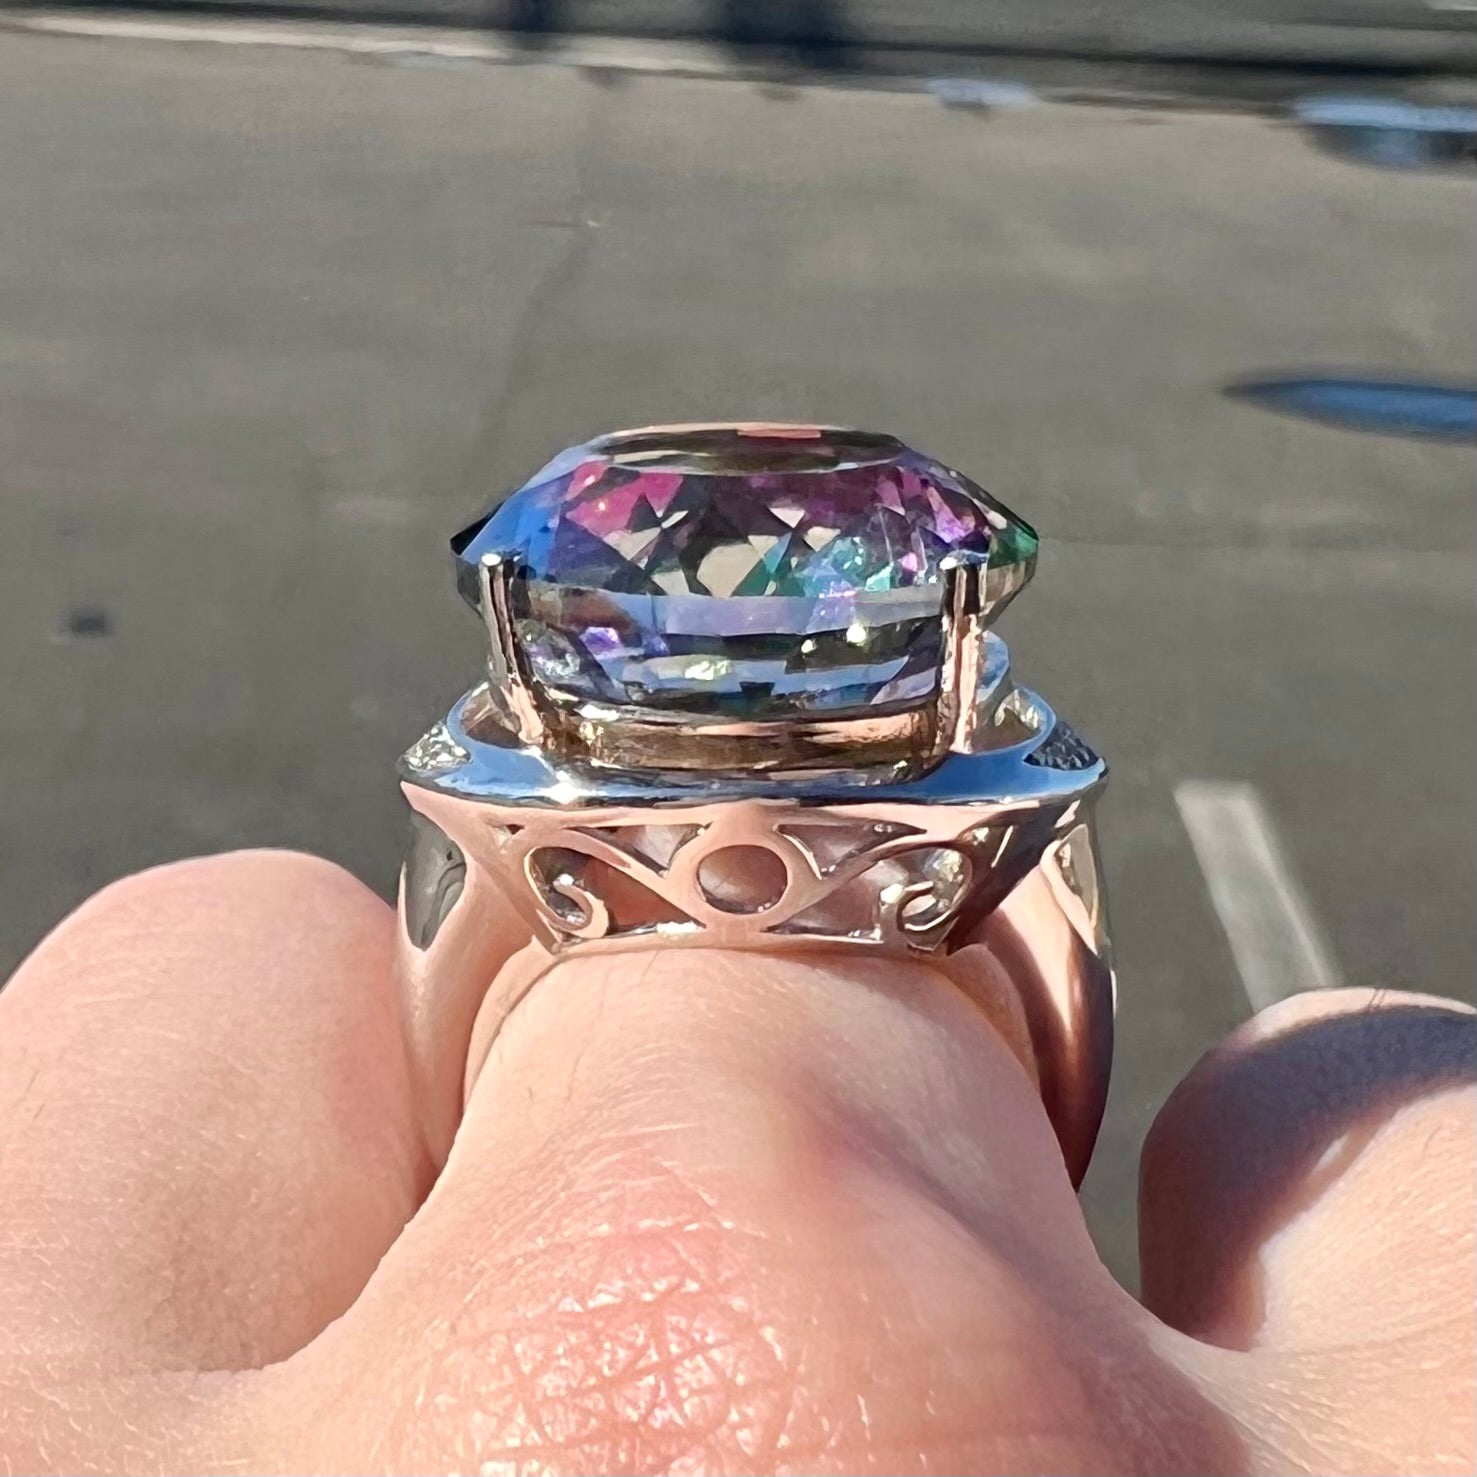 A large, round cut pink and green mystic topaz set in a sterling silver ring with white topaz accent stones.